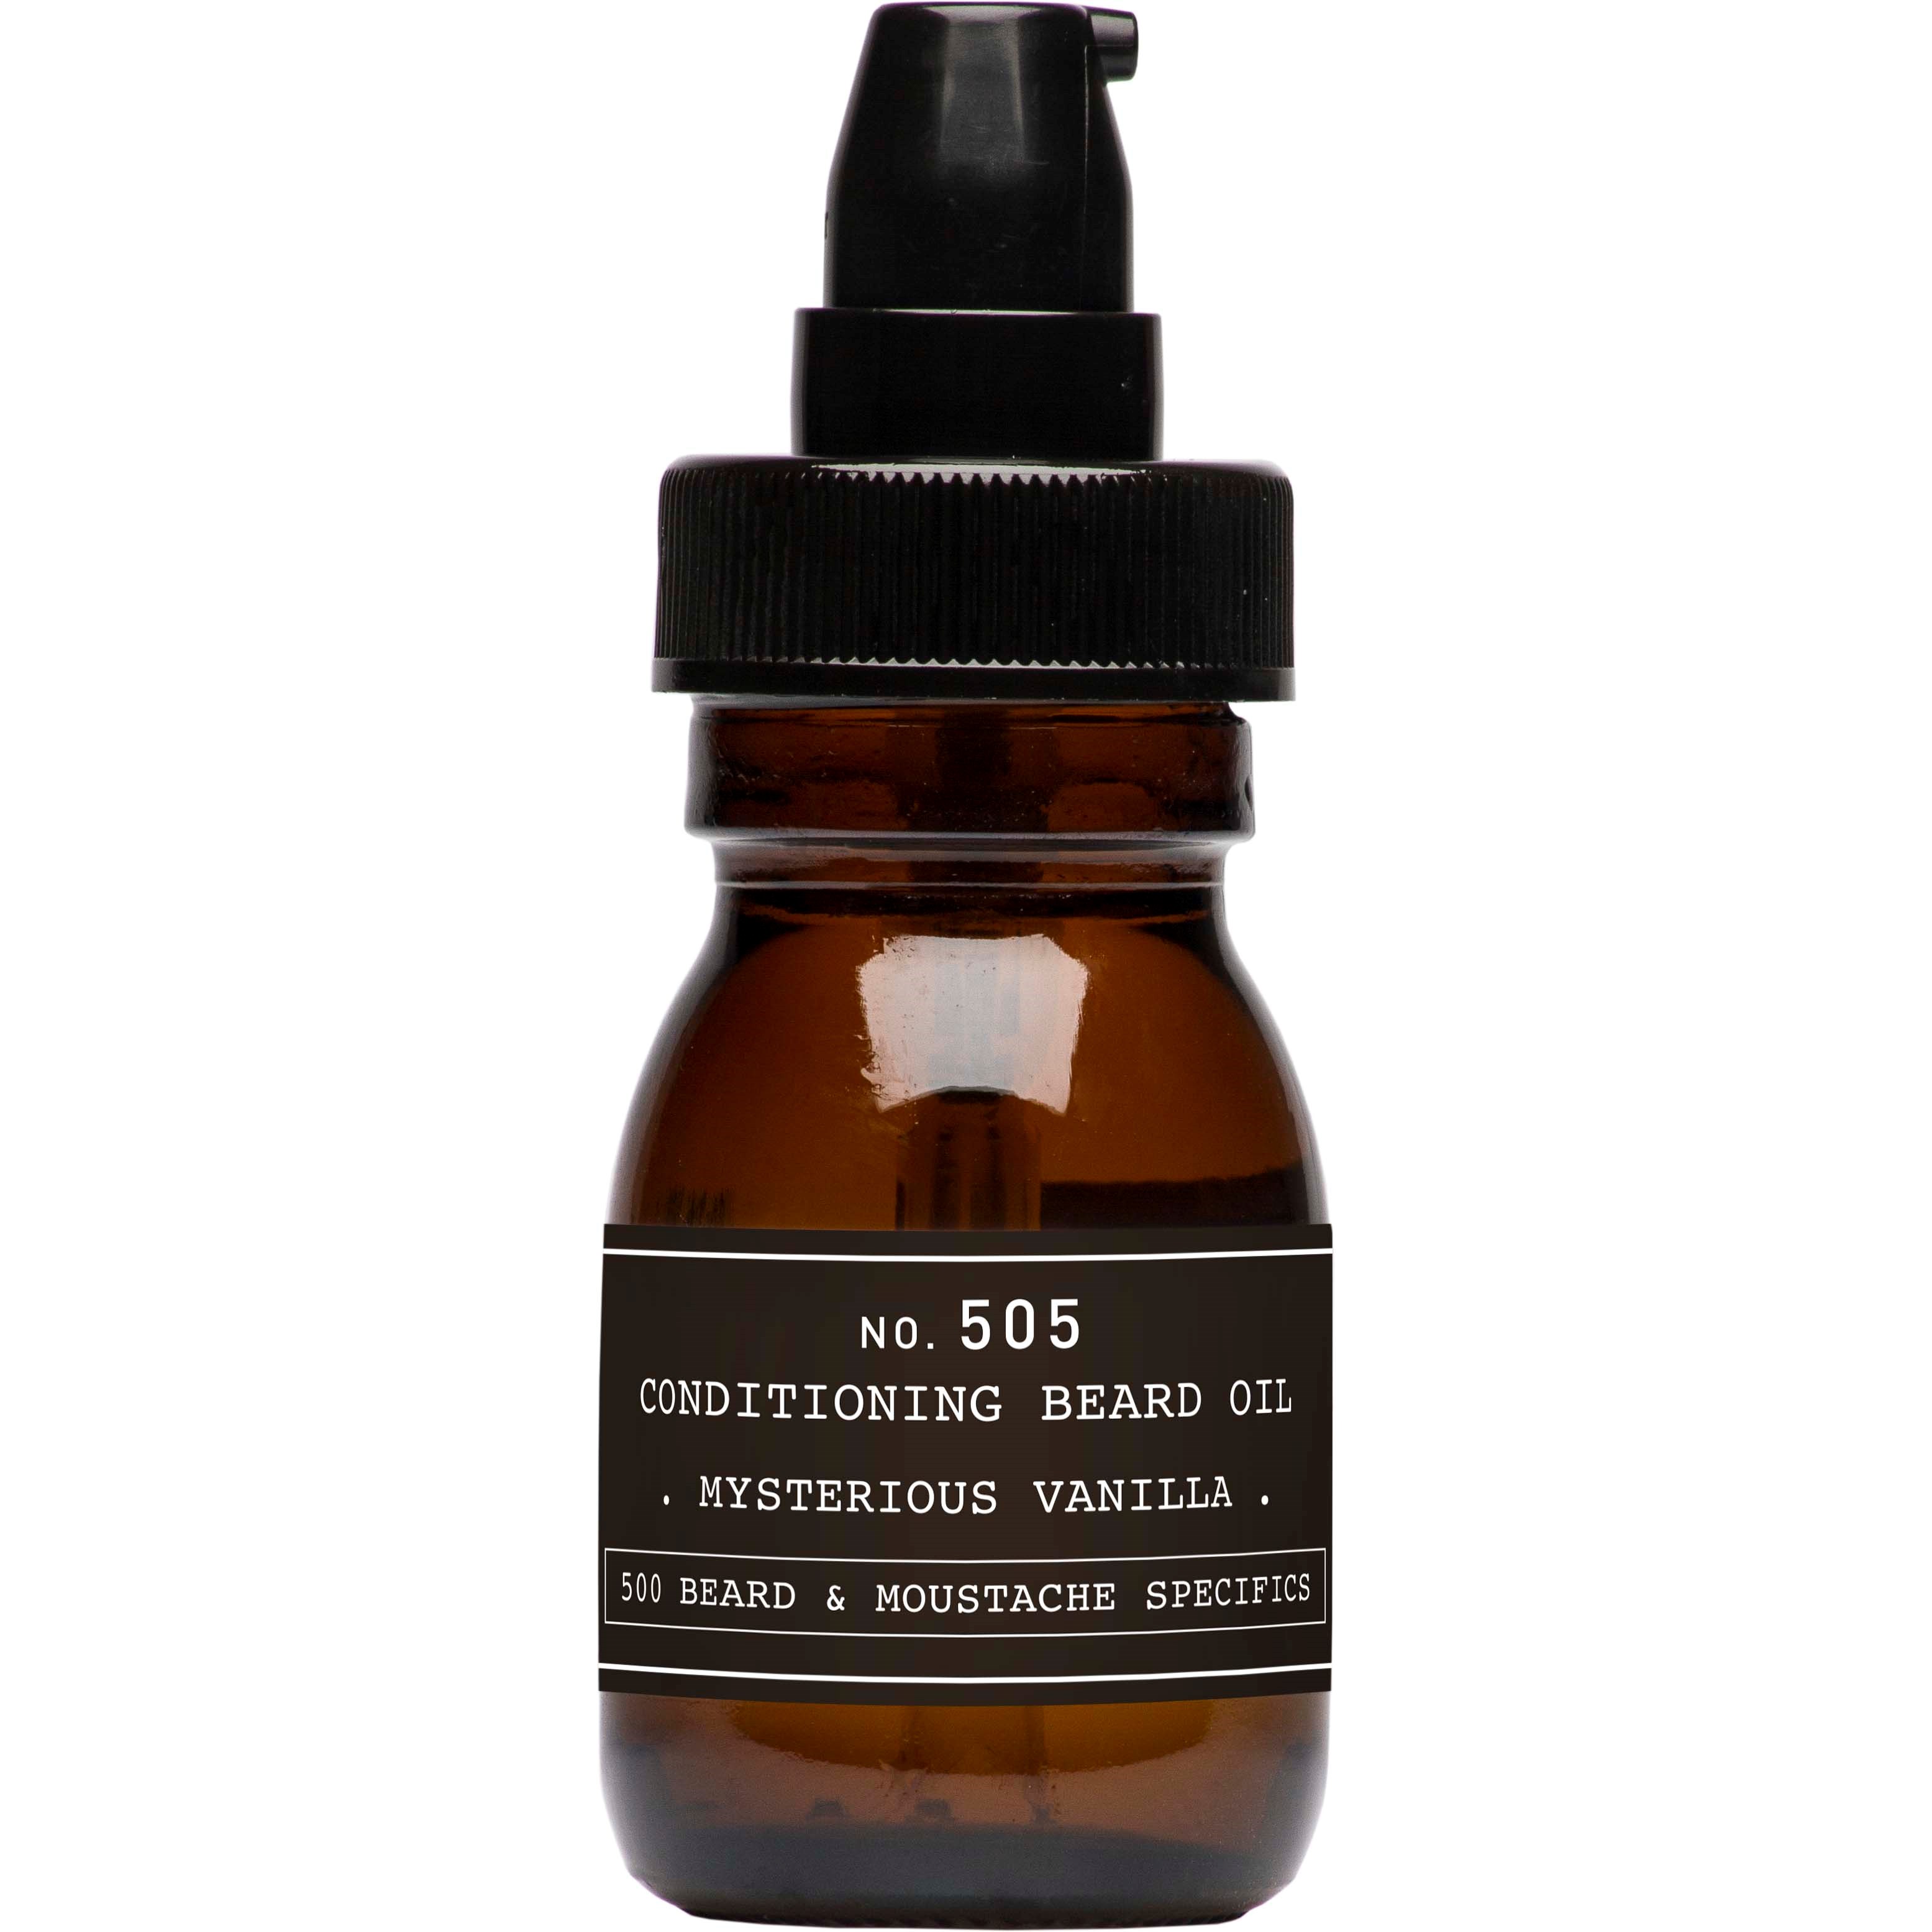 DEPOT MALE TOOLS No. 505 Conditioning Beard Oil Mysterious Vanilla 30